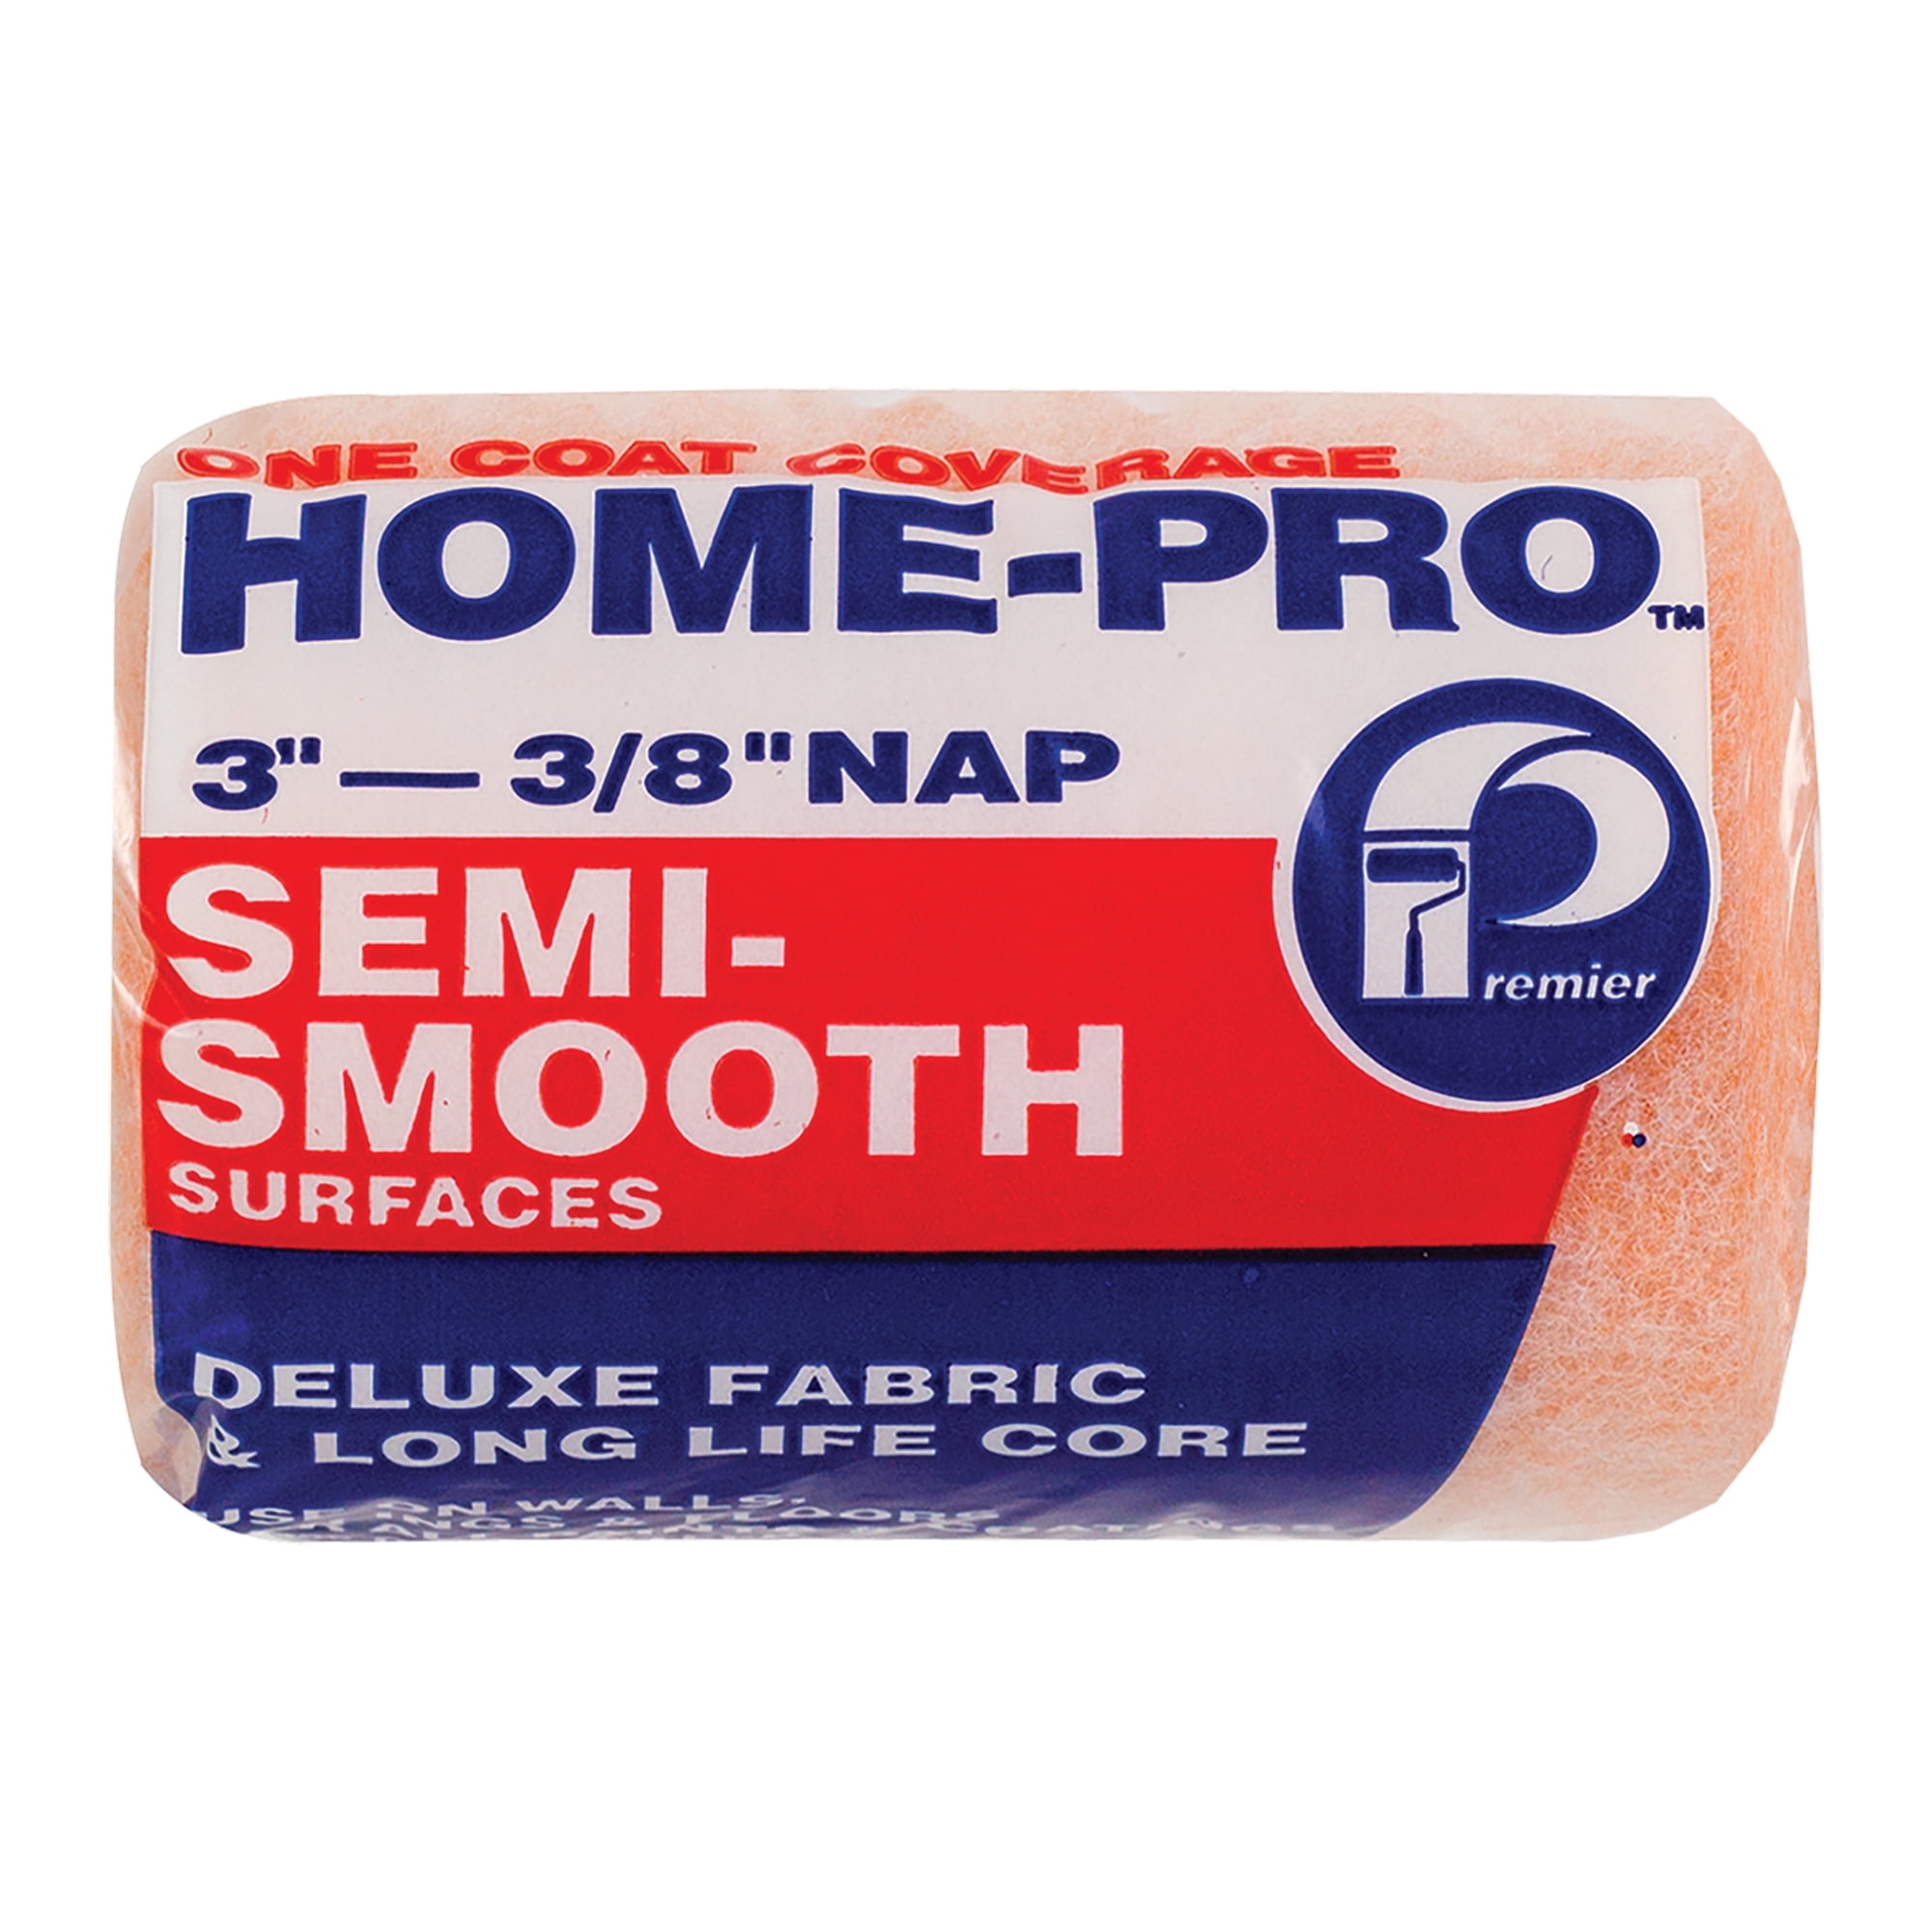 1905413 Home-pro Polyester 0.38 X 3 In. Paint Roller Cover For Semi-smooth Surfaces, Melon - Case Of 36